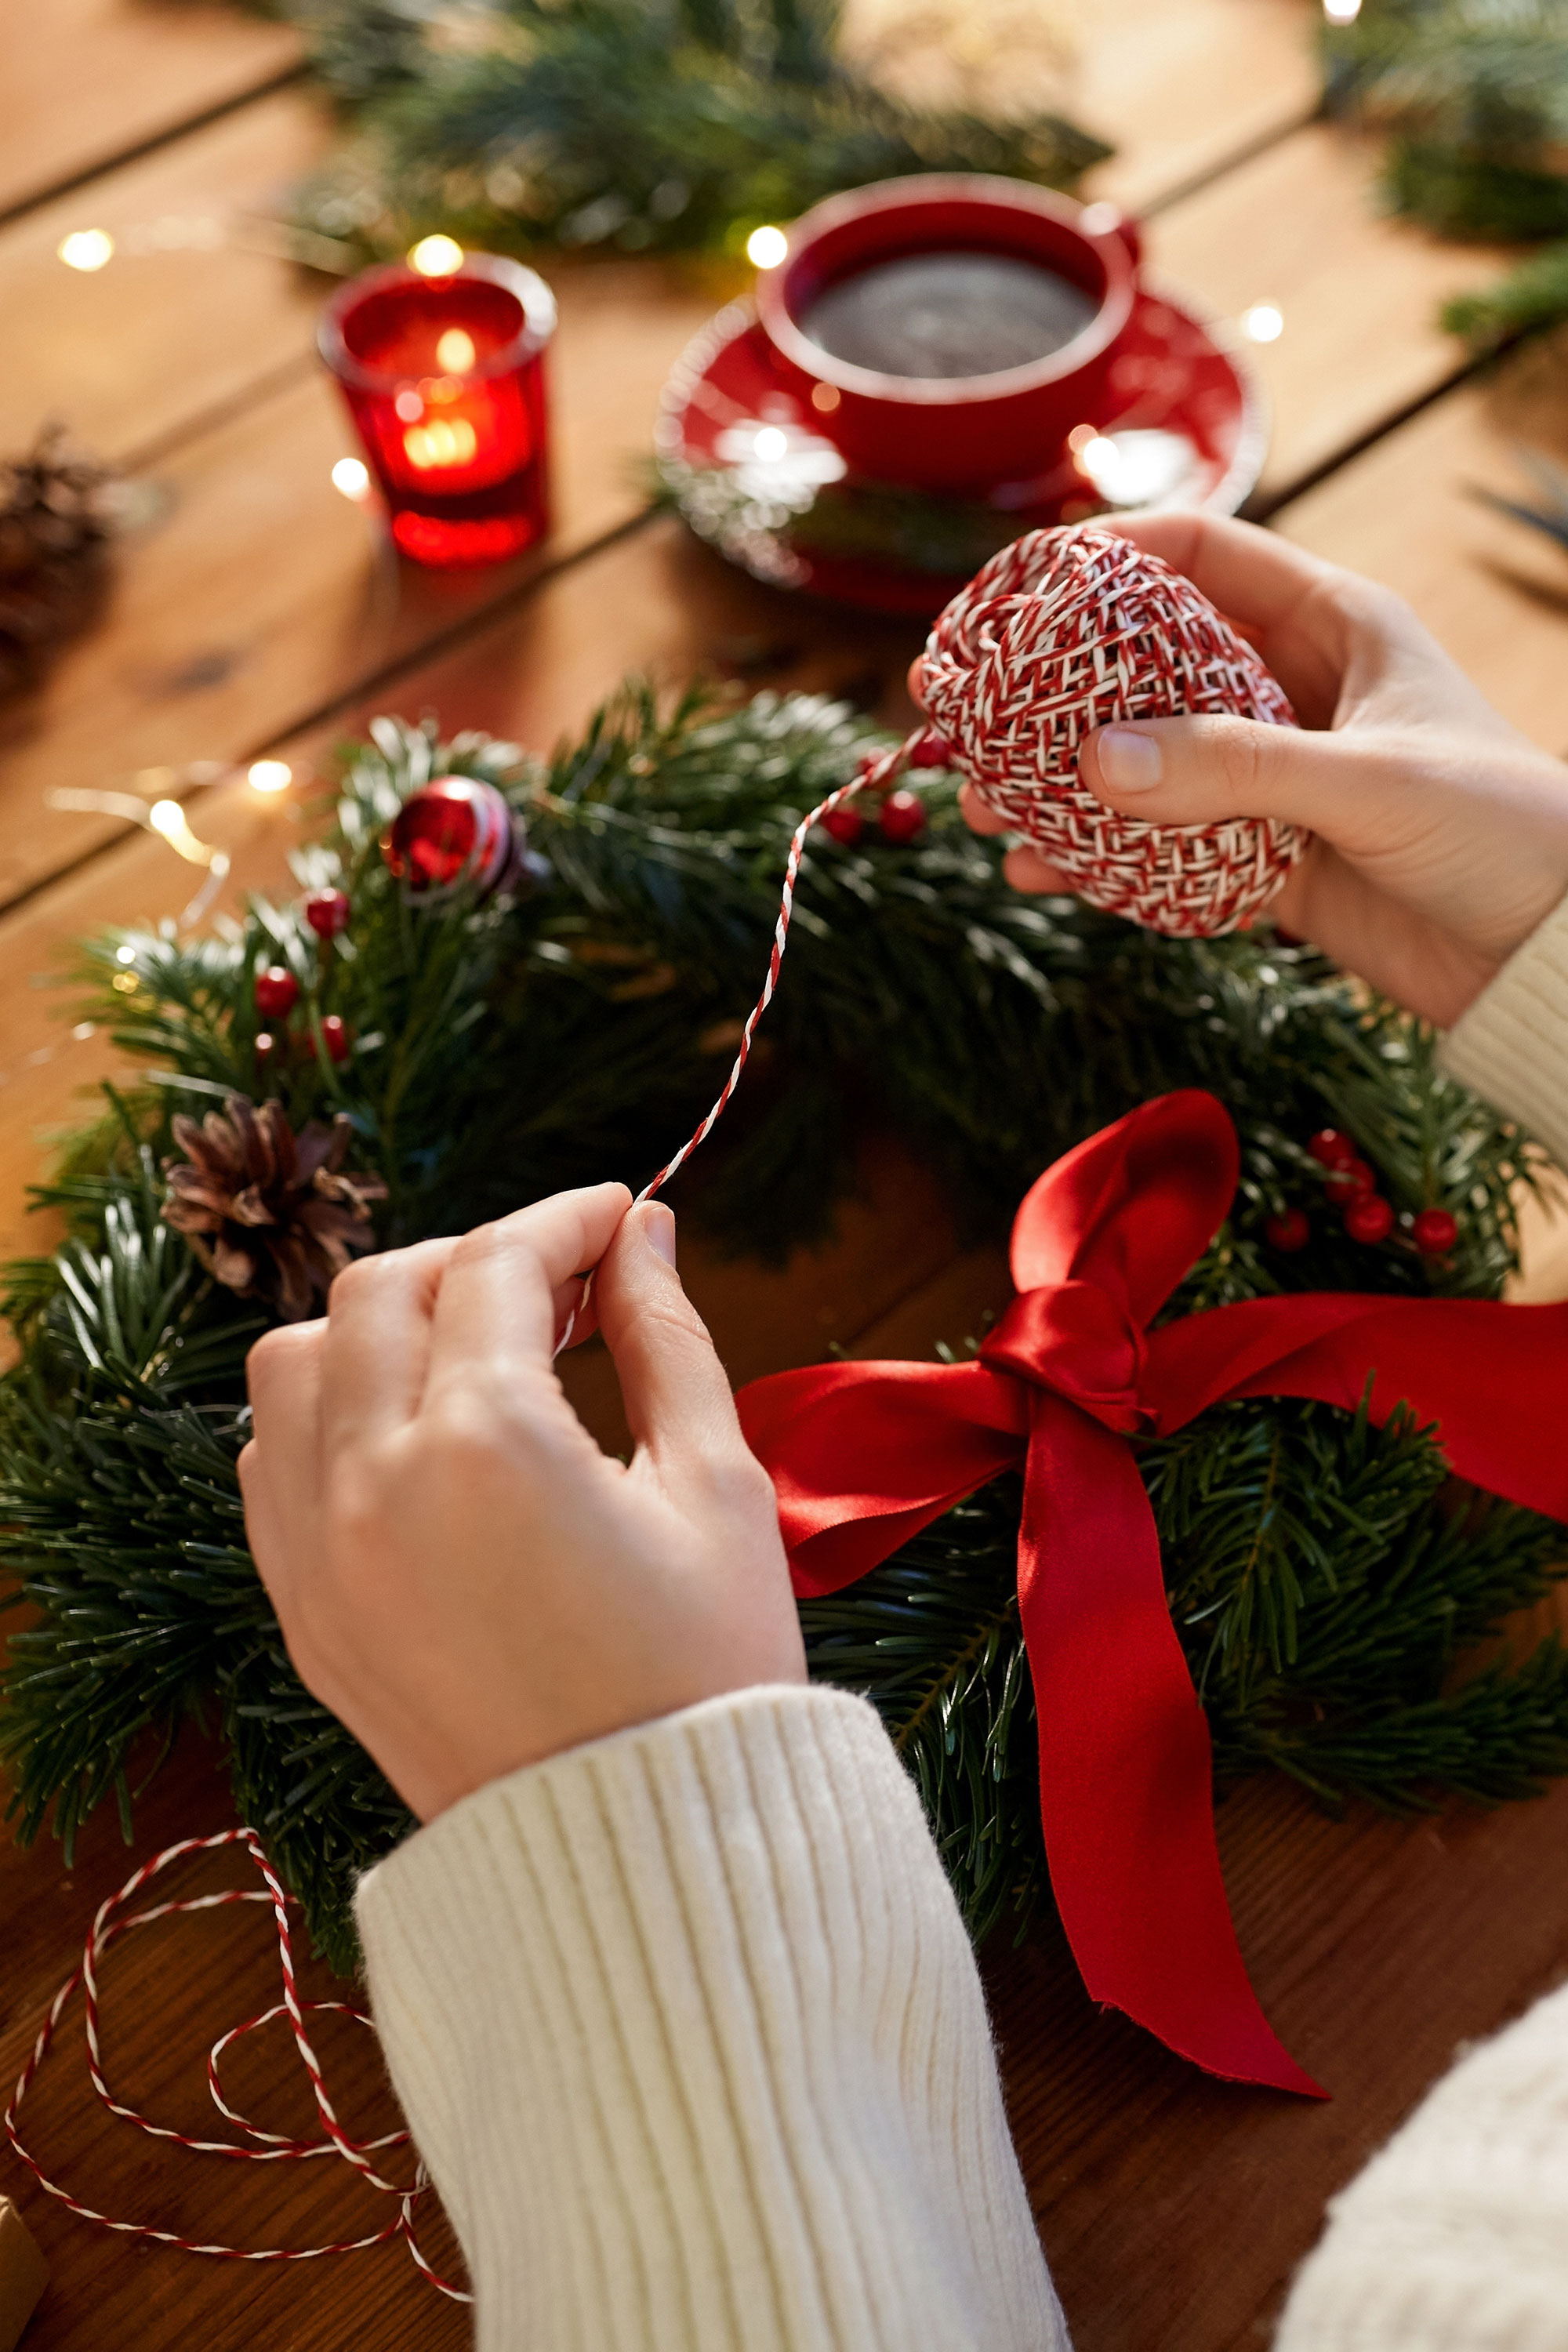 This image shows the hands of someone creating a homemade Christmas wreath which has pinecones, red and white twine and a big red satin bow.